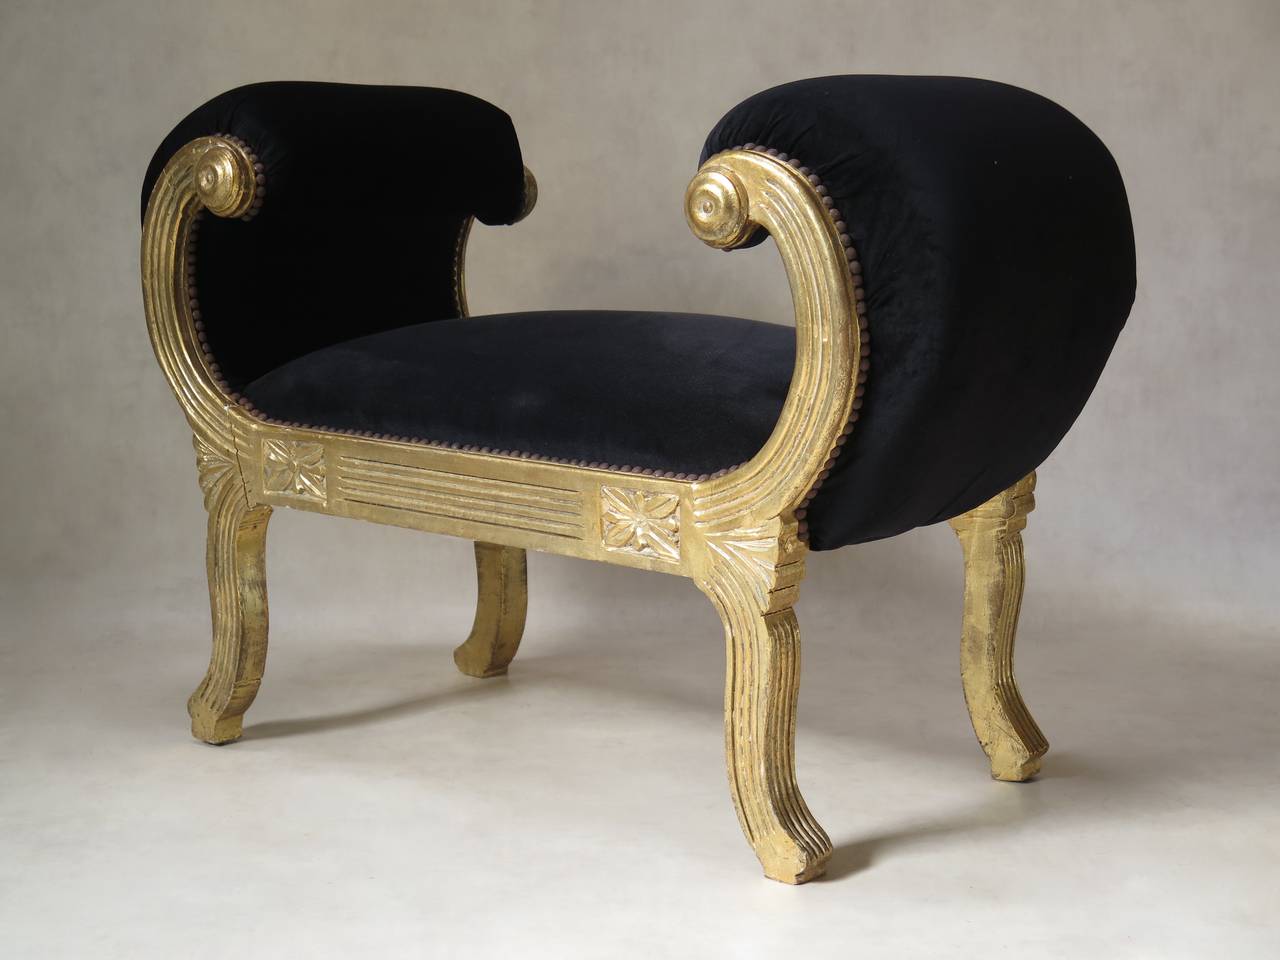 Fun and theatrical banquette with a gold-painted wood structure and scrolled arms.